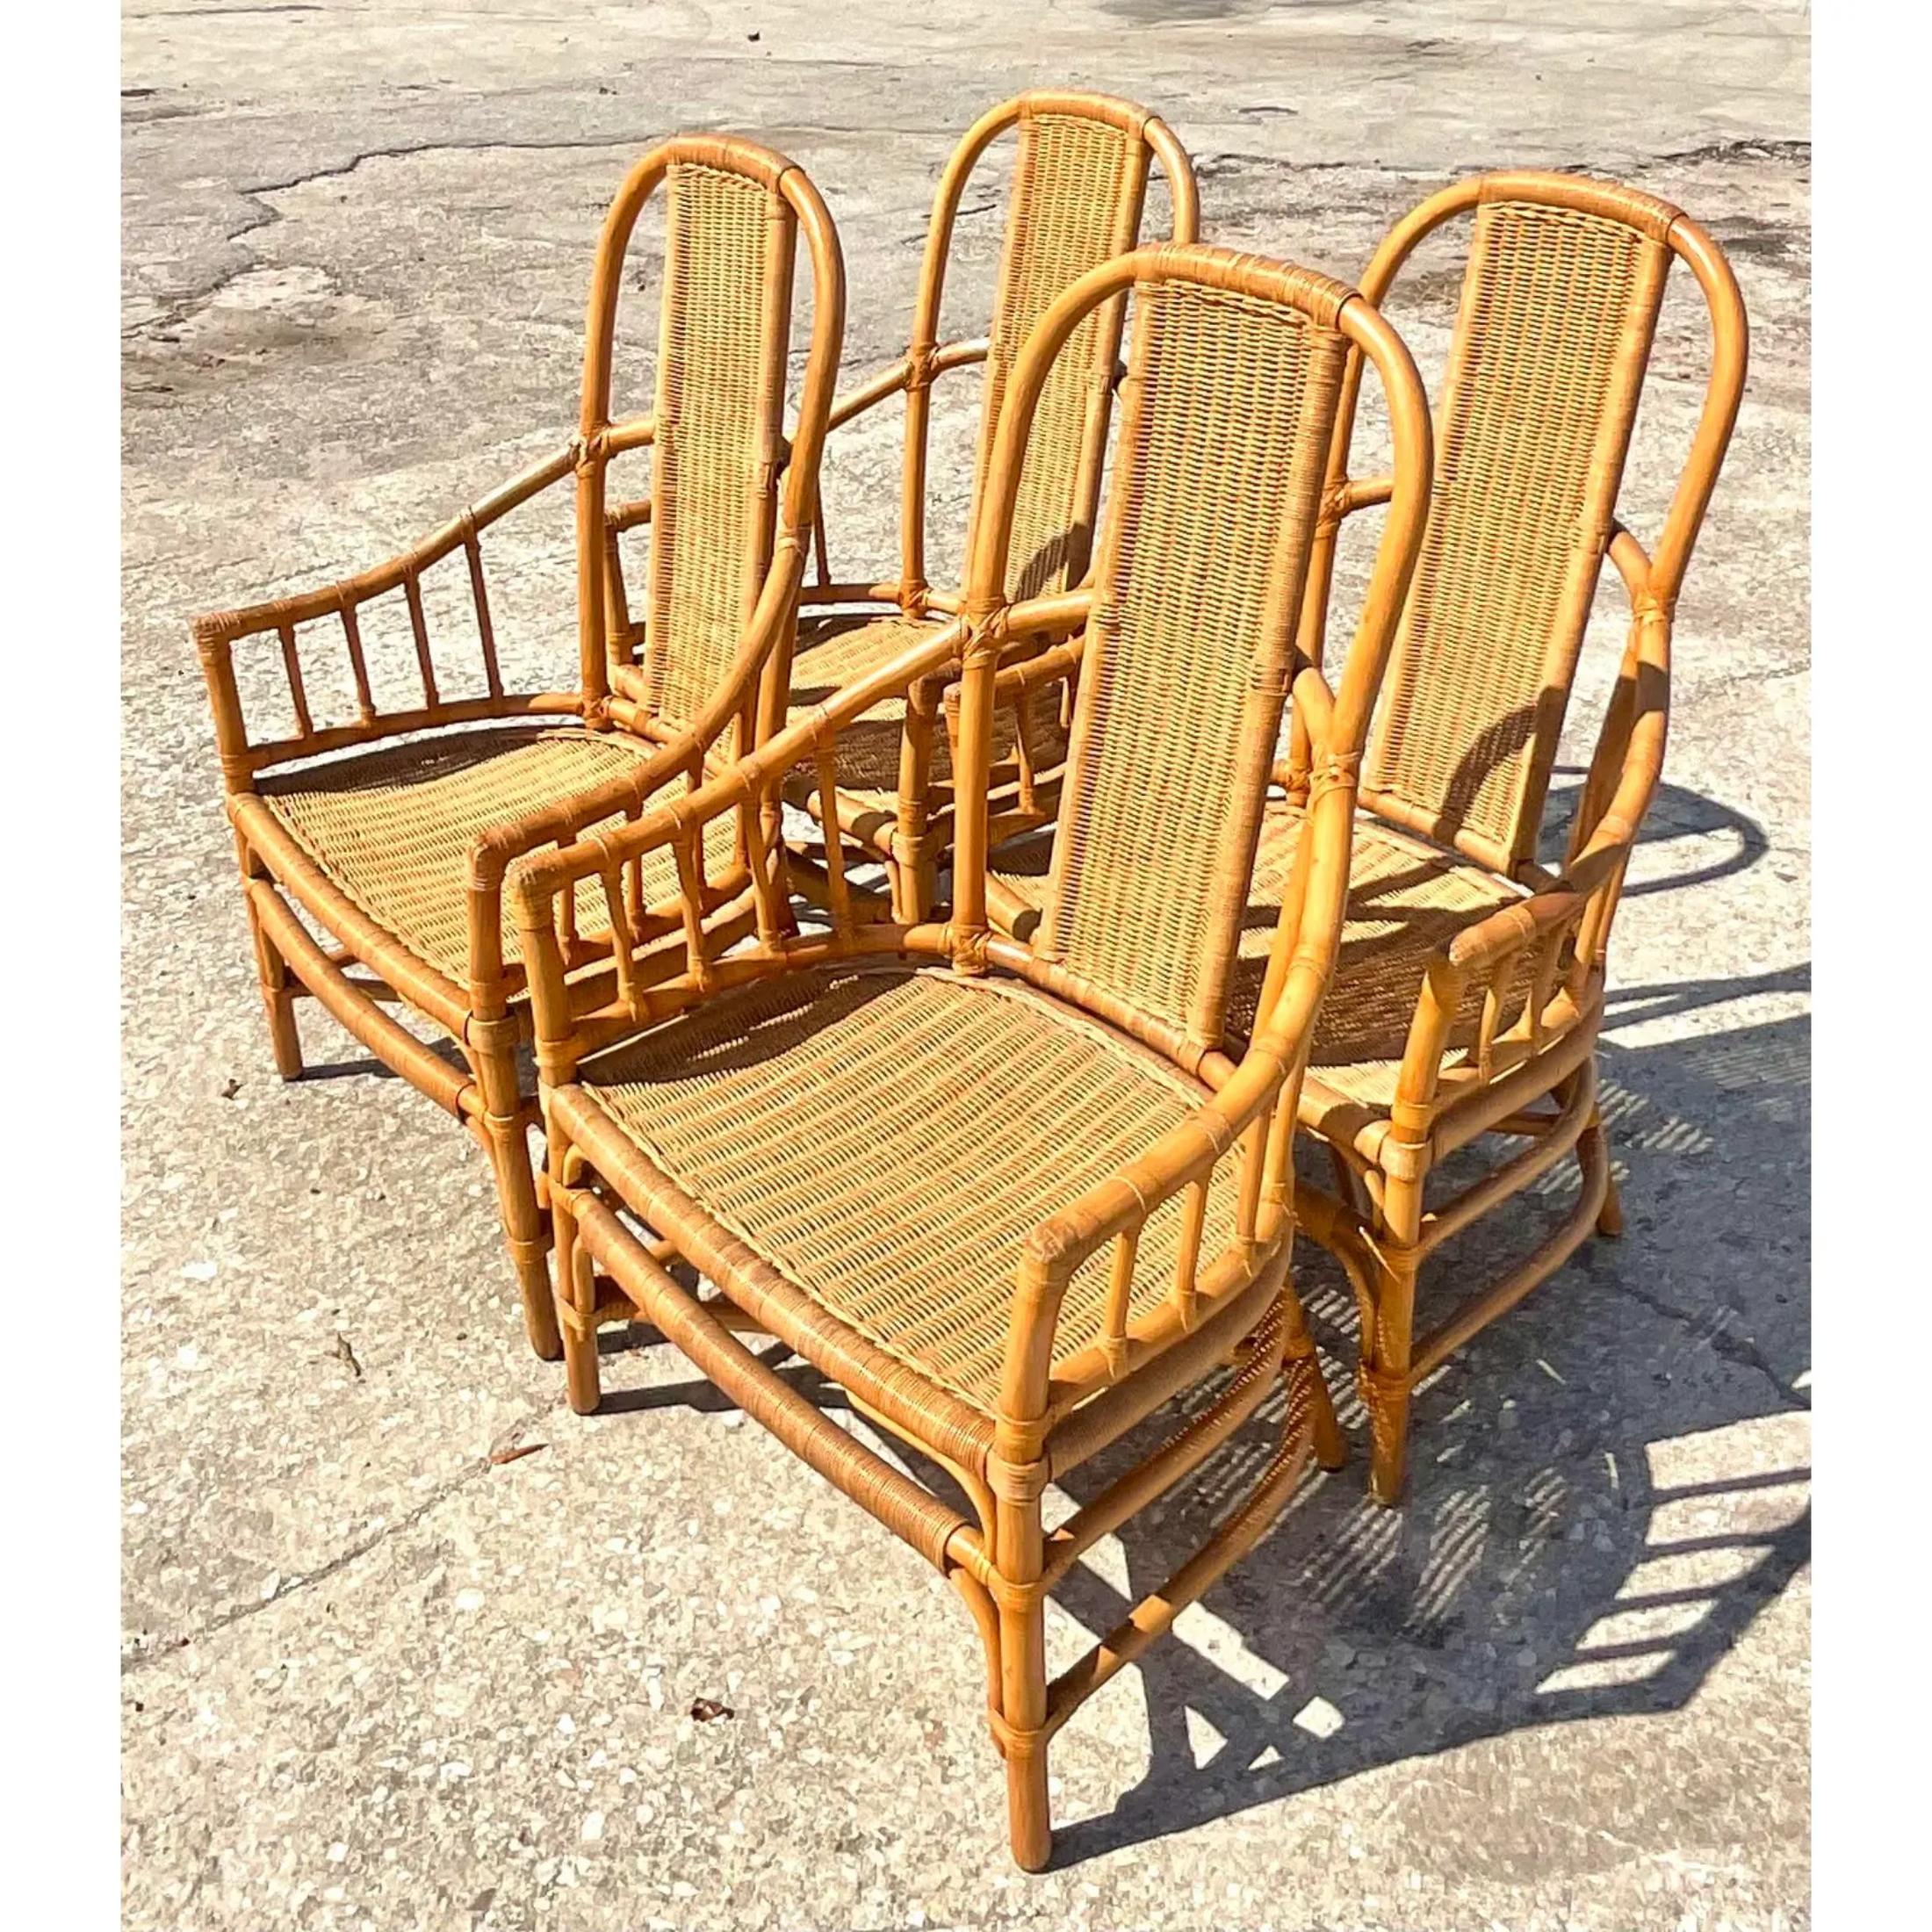 Vintage Coastal Mark David Woven Rattan Dining Chairs - Set of 4 In Good Condition For Sale In west palm beach, FL